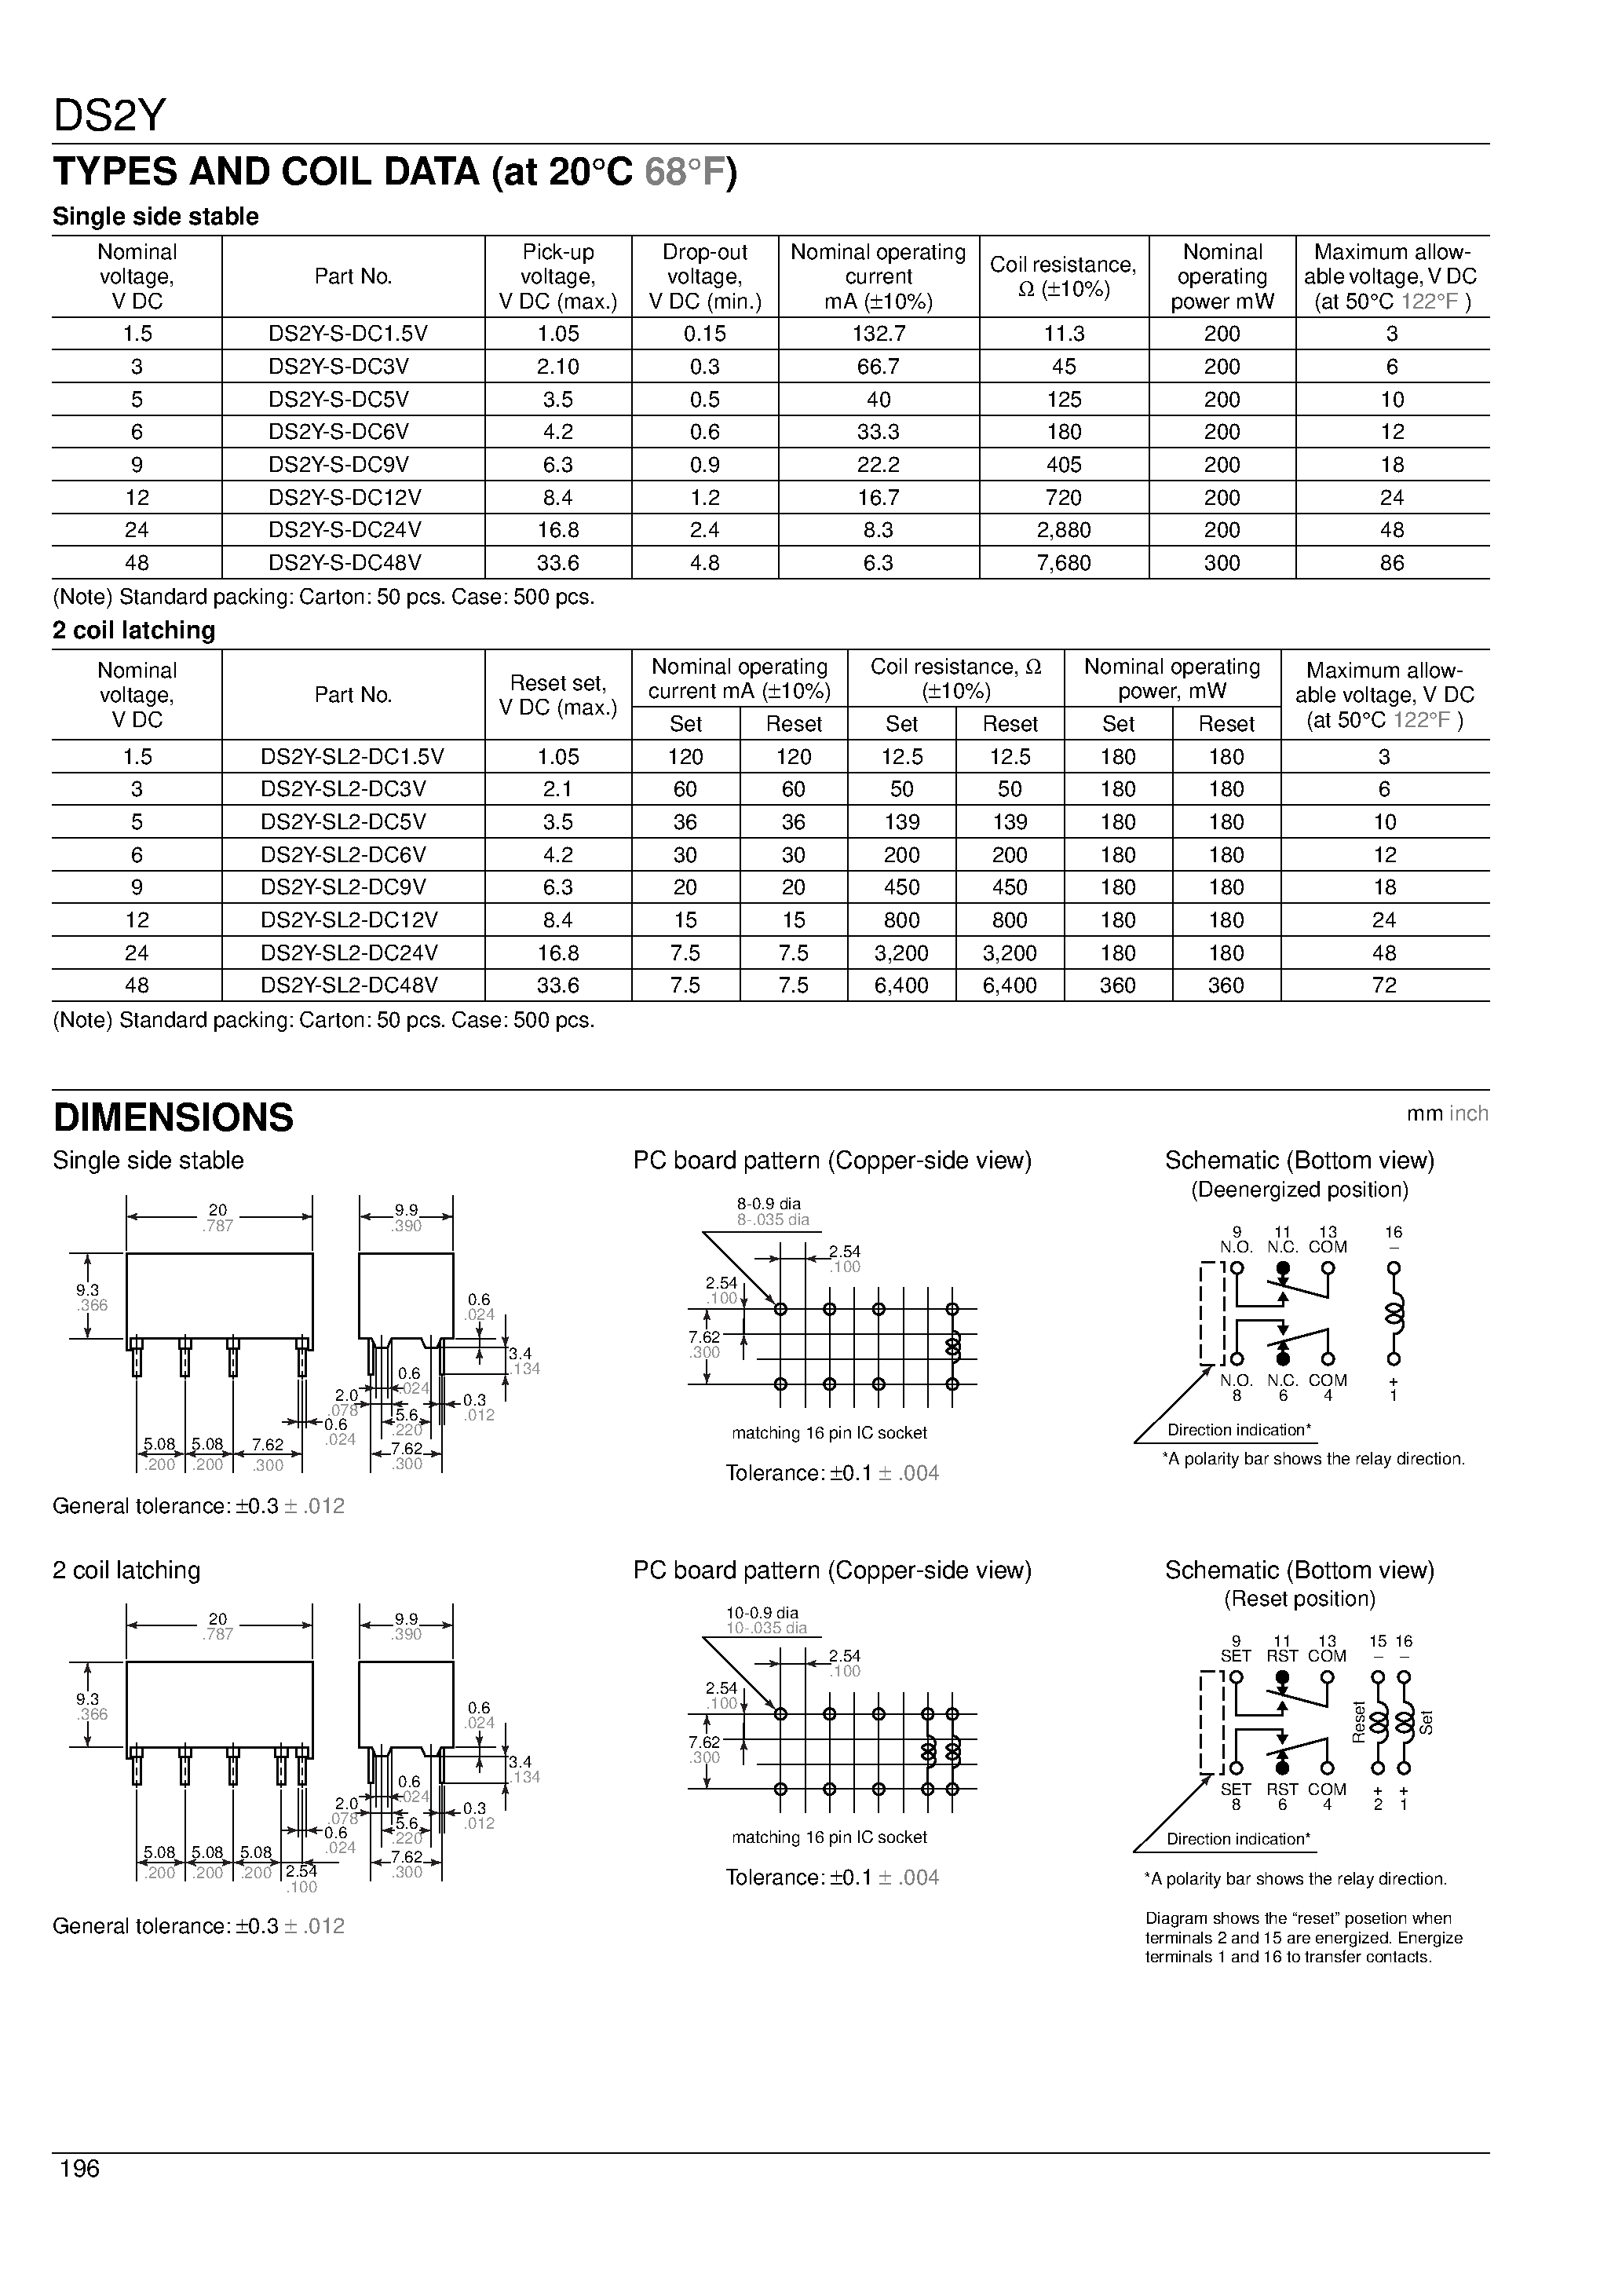 Datasheet DS2Y-S-DC12V - 2 Form C contact High sensitivity-200 mW nominal operating power page 2